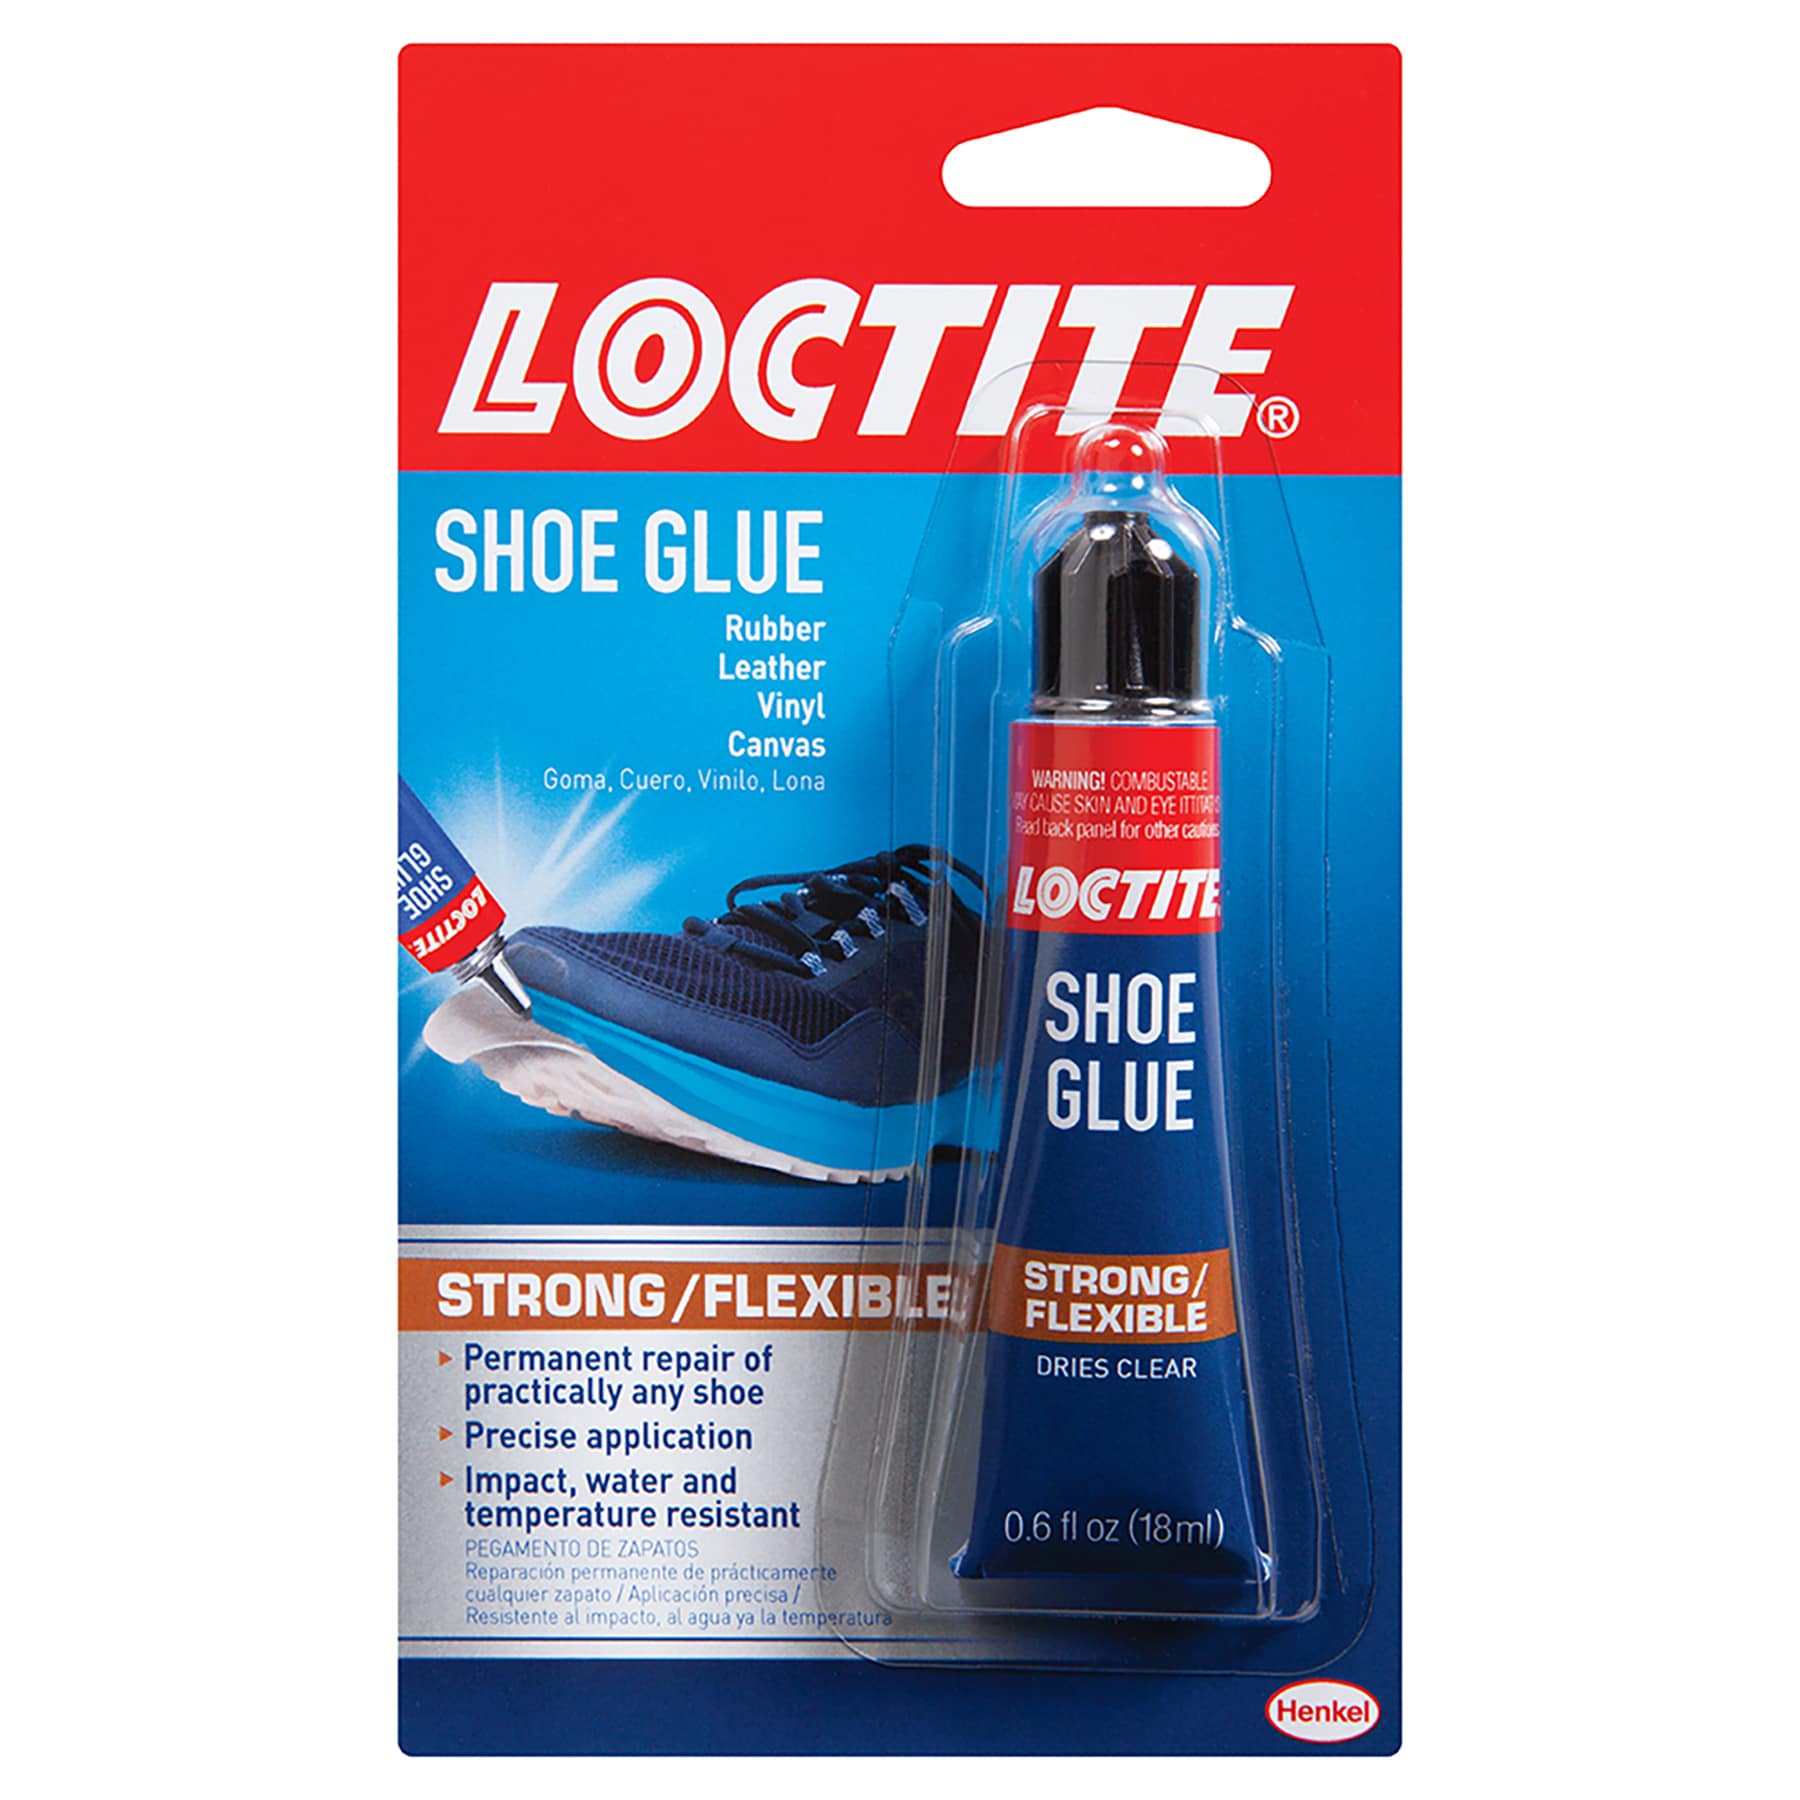 Super Glue Shoe Sole Repair Glue Coat For Fixing Shoes Boots Leather  Rubber.